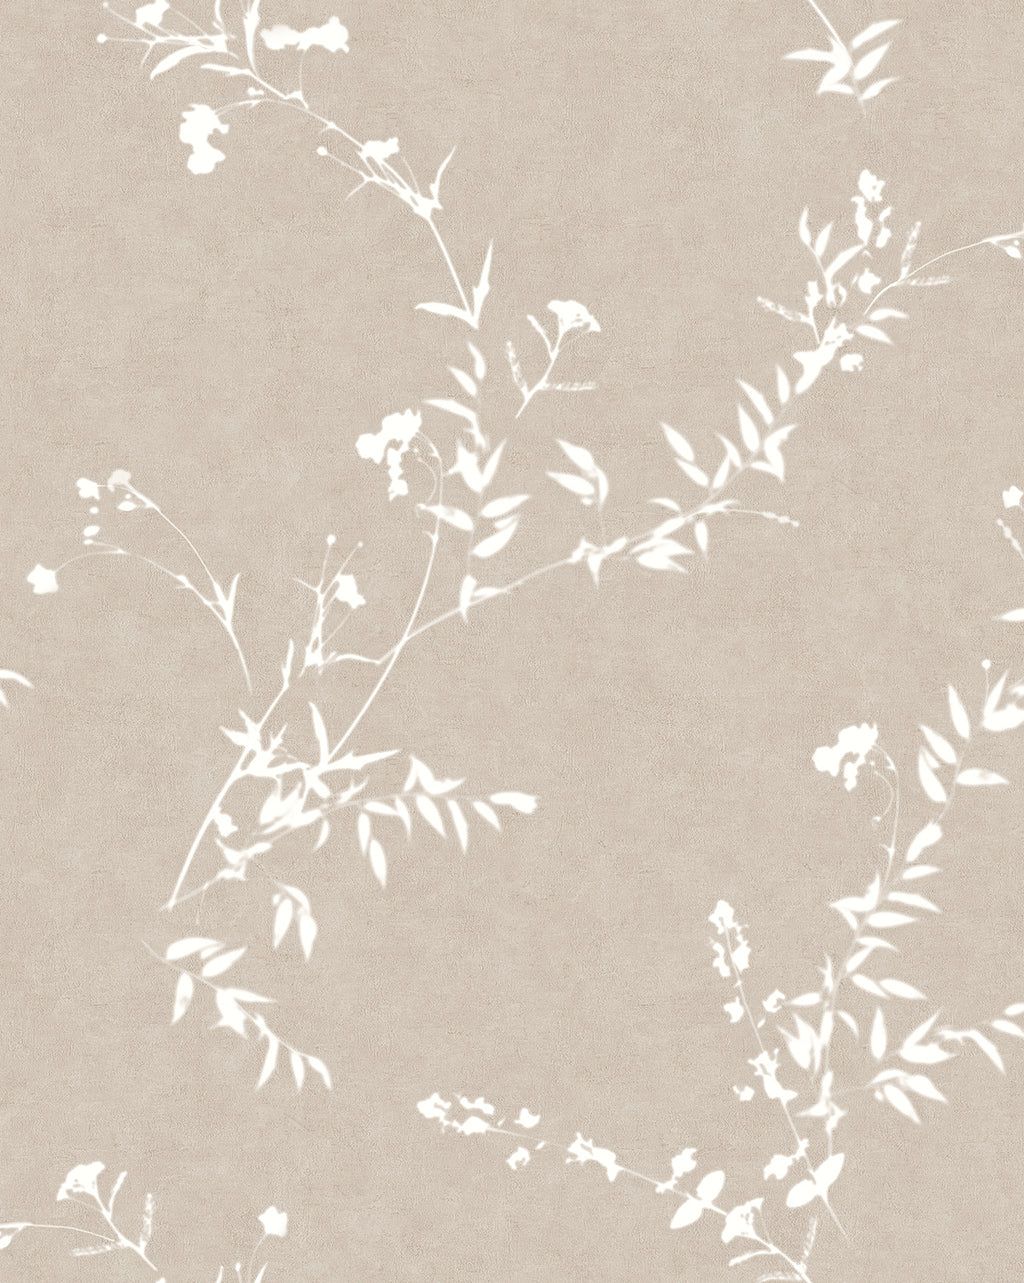 Verity Floral Wallpaper | McGee & Co.